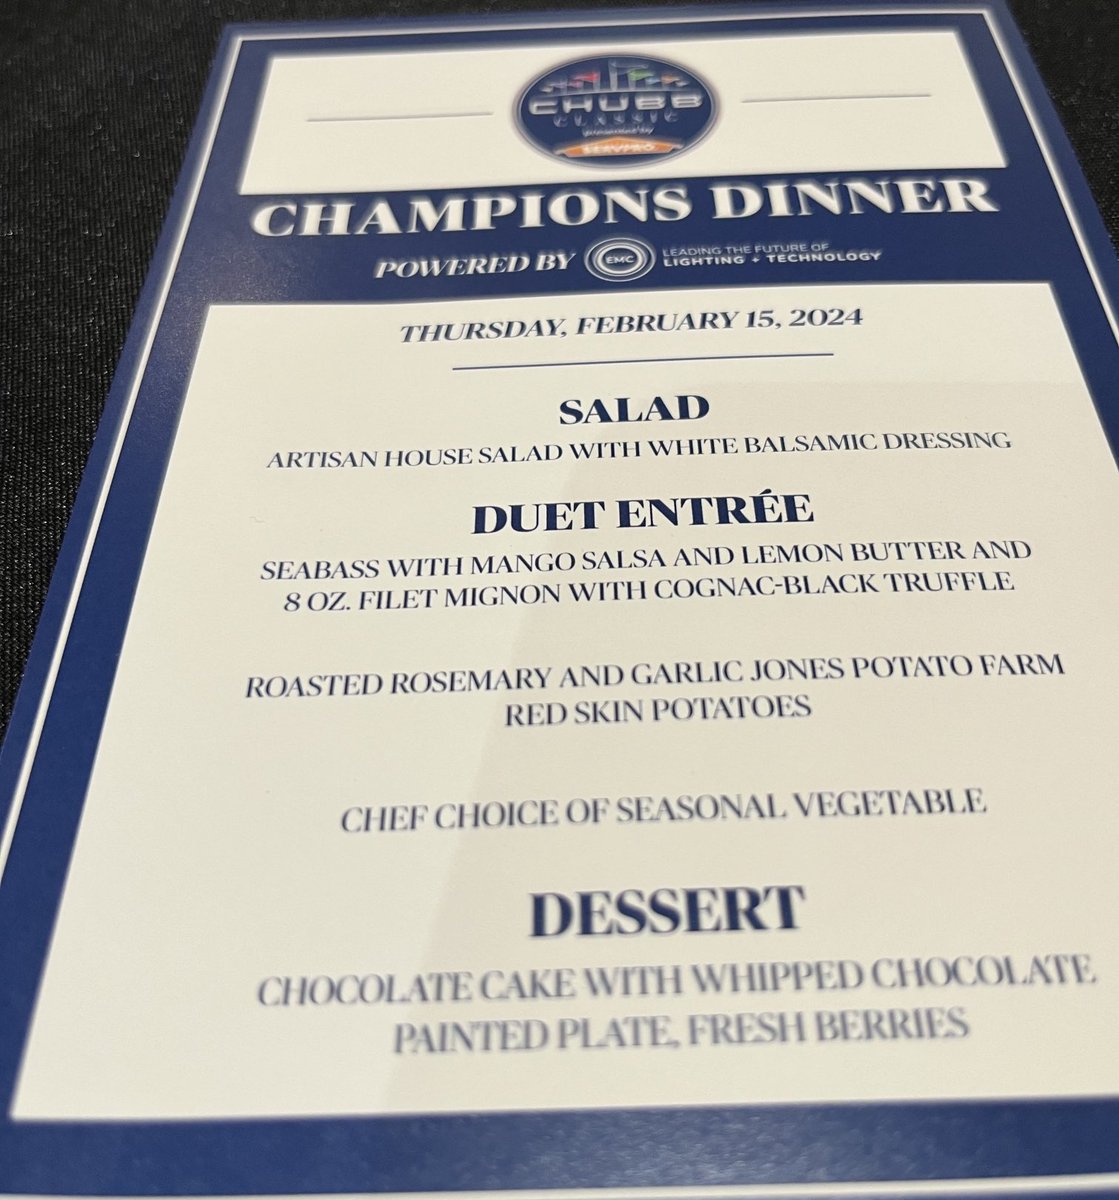 Cool new tradition @ChubbClassic in Naples. Thursday night Champions Dinner. ⁦Five-time winner @BernhardLanger6⁩ unable to attend (doctor’s orders) but did chose the menu. Thanks @chubb, @EMC_Energy, @SERVPRO